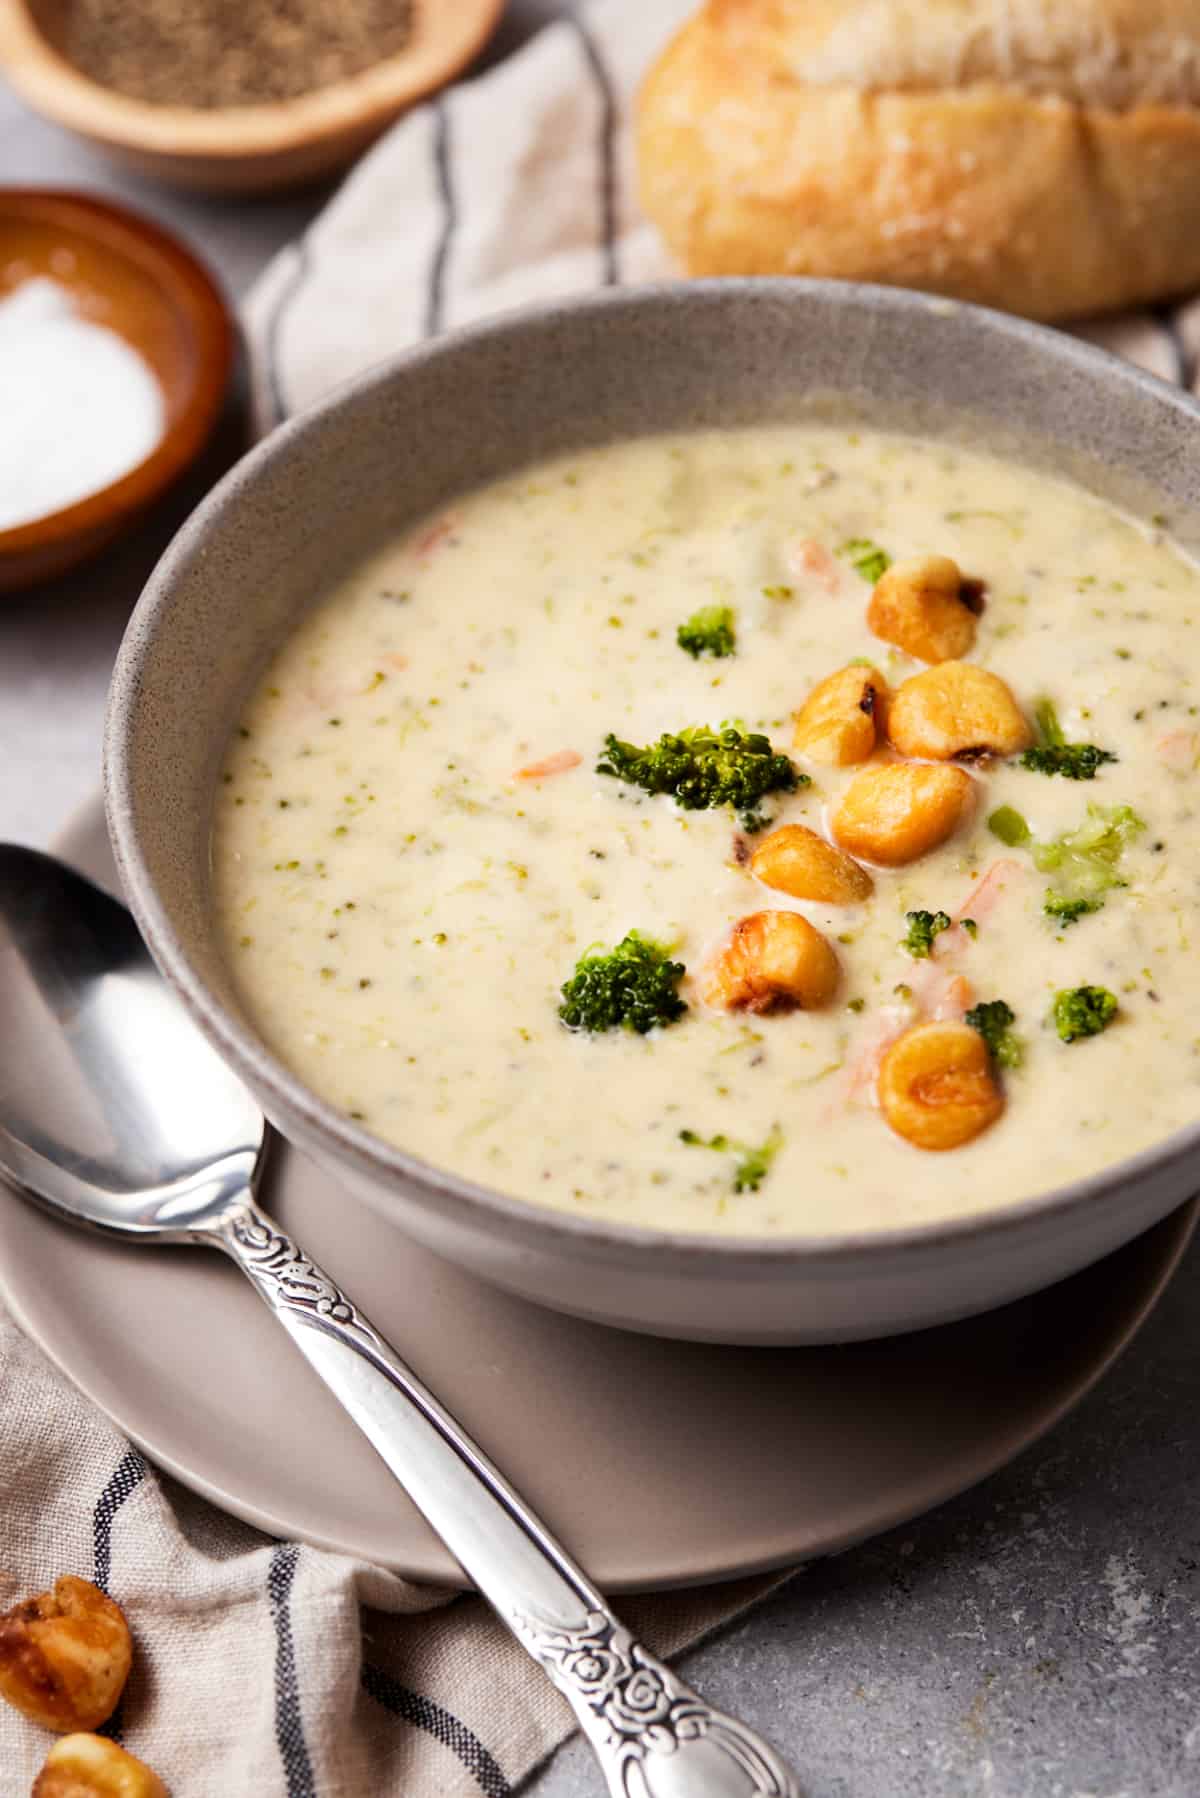 Broccoli Cheddar soup in bowl with corn nuts.